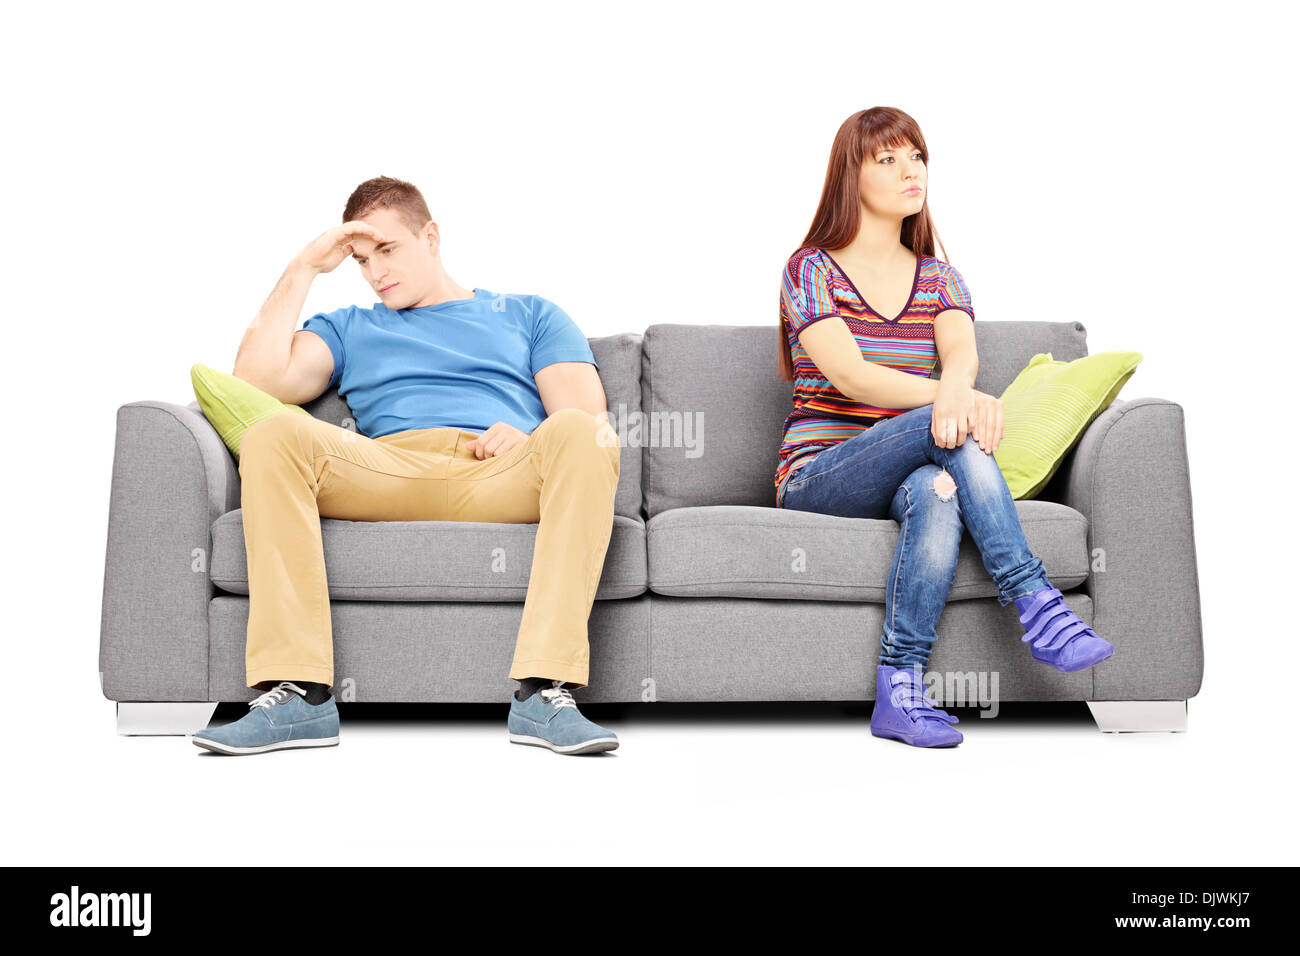 Sad heterosexual couple sitting on a sofa after an argument Stock Photo